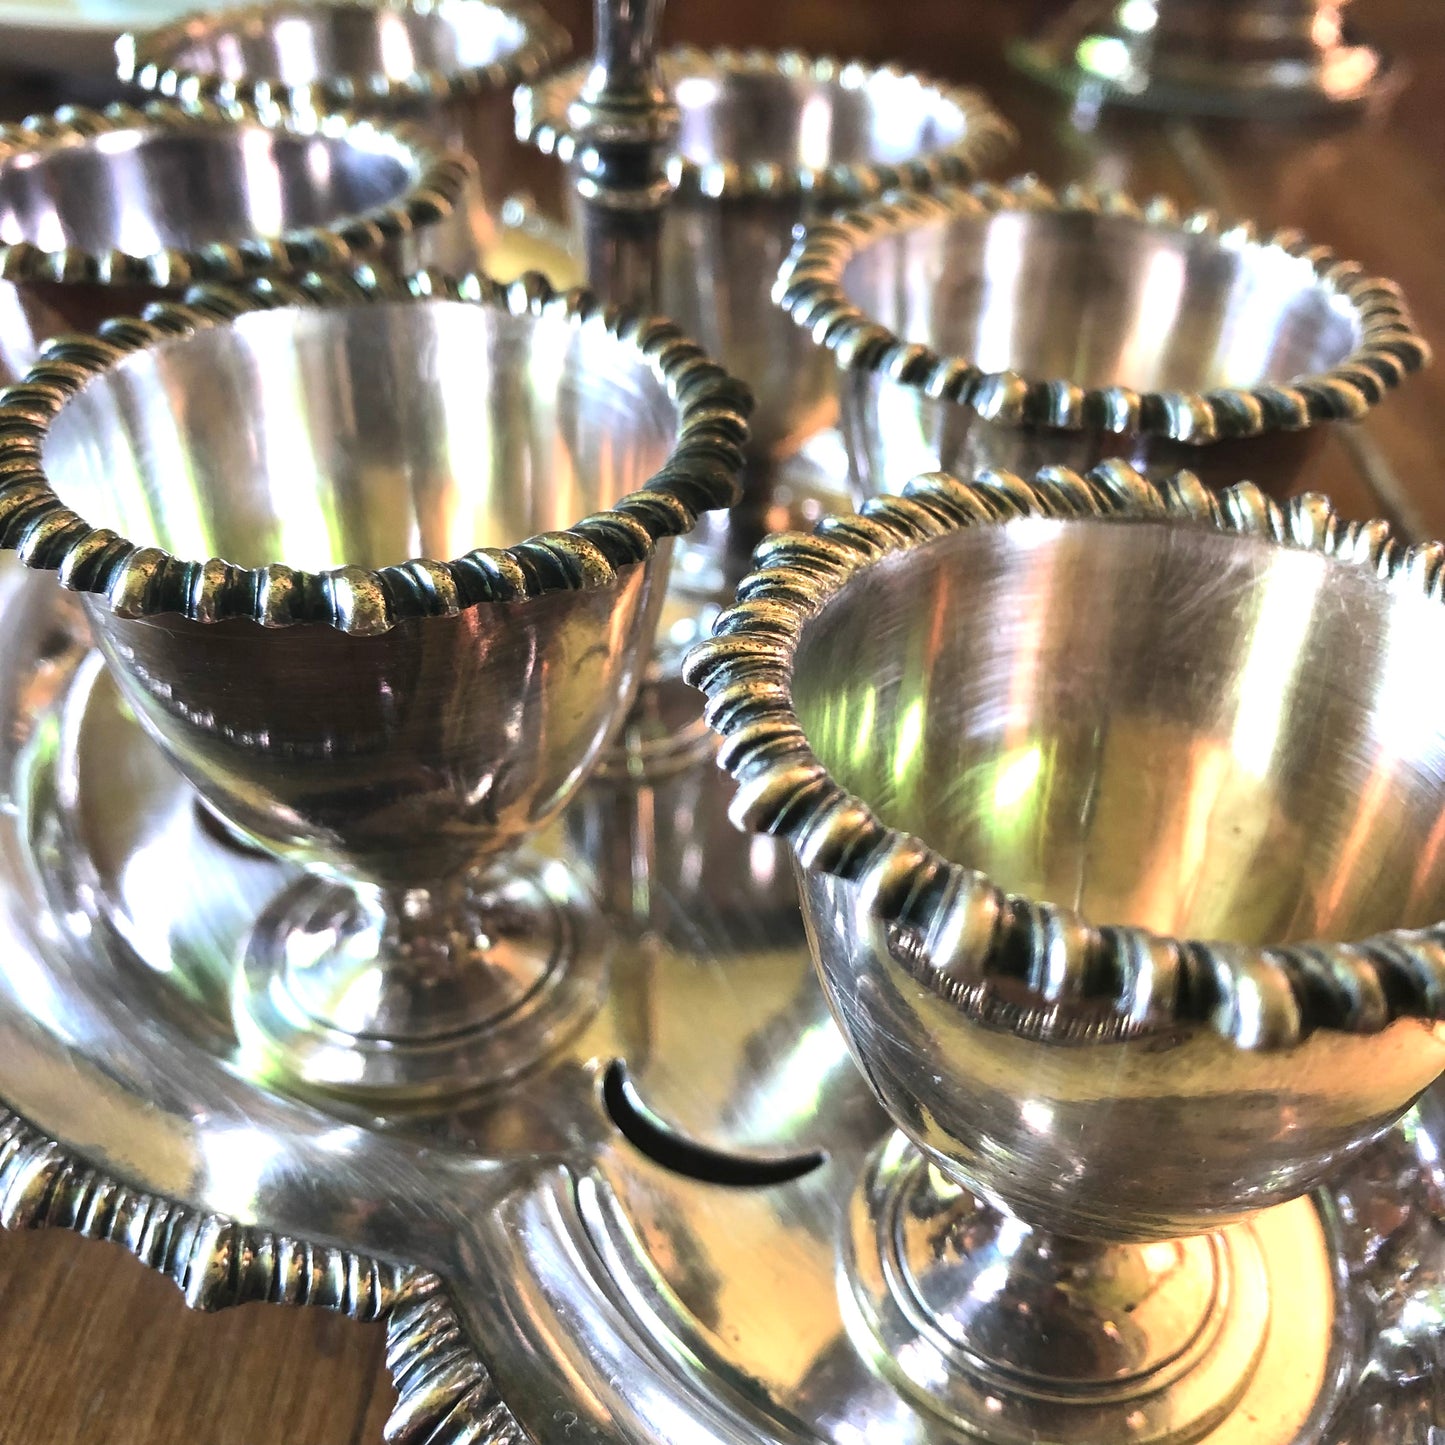 Antique Silver Plated Egg Cup Set of 6 with Tray